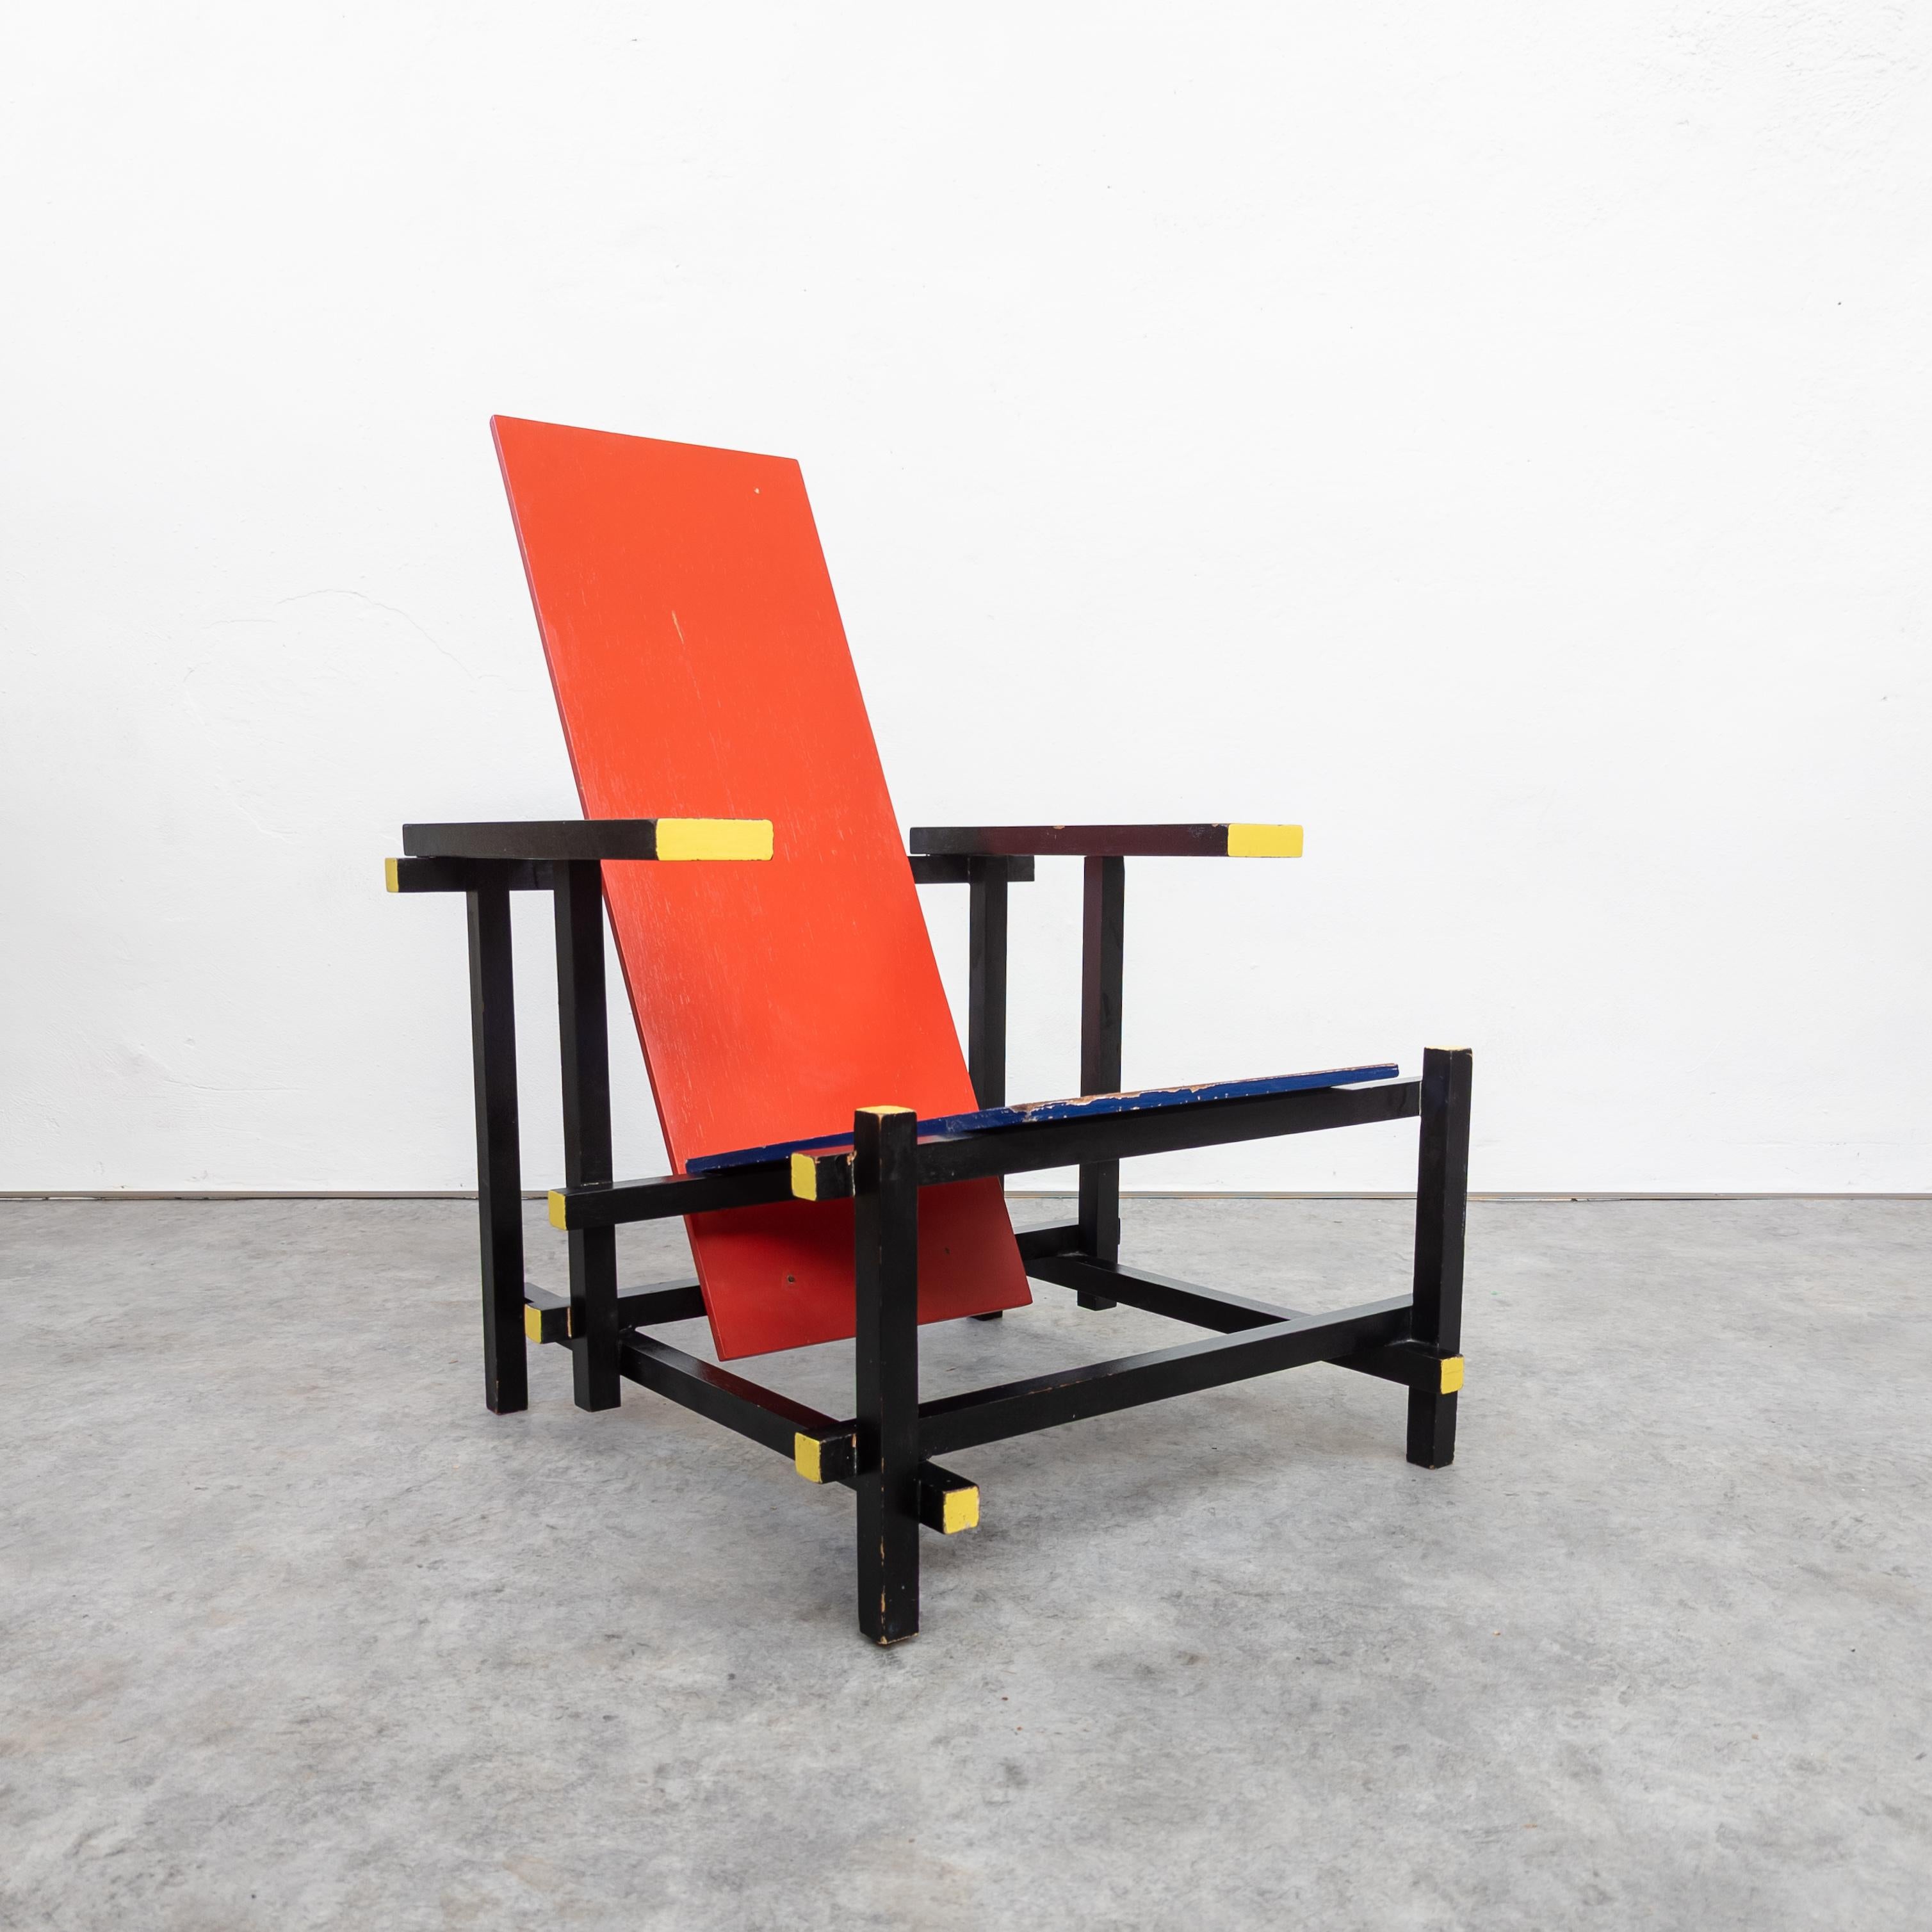 Iconic chair designed by Dutch artist Gerrit Rietveld between 1918 - 1923. This particular piece comes from early 1970's. Manufacturer is unknown however all the joints and overall craftsmanship look very professional. In good vintage condition.